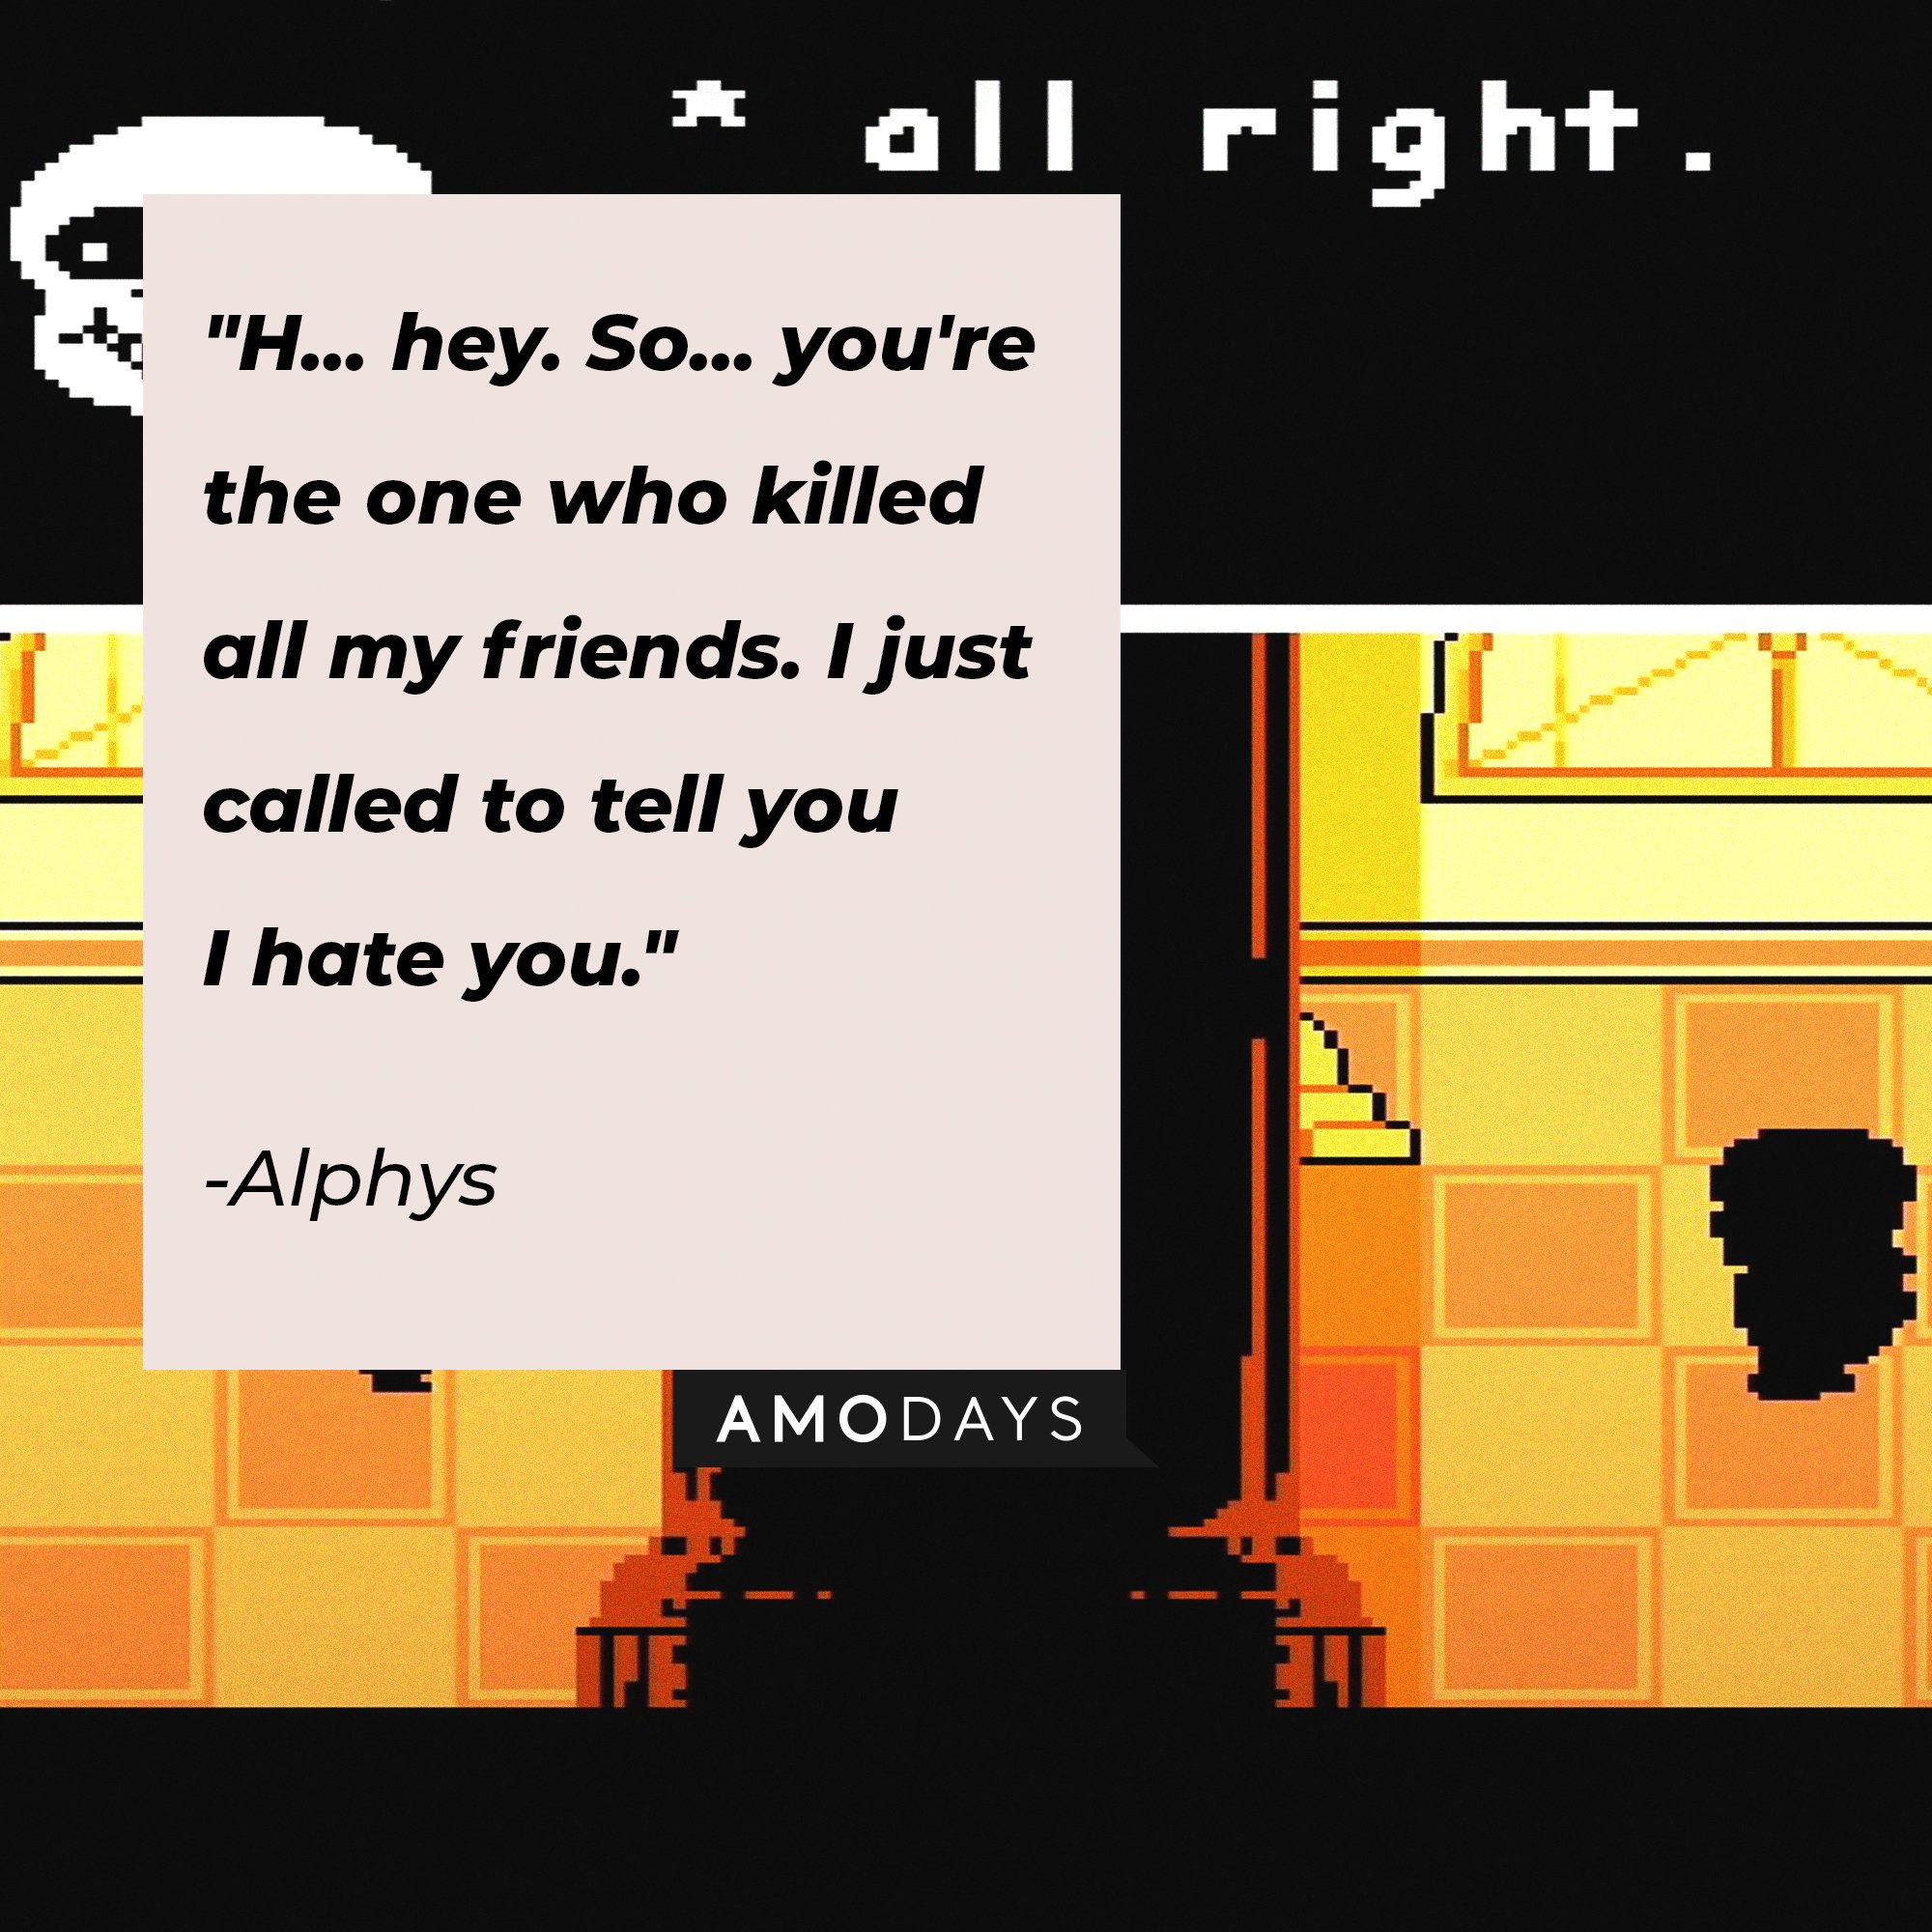 Alphys’ quote: "H... hey. So... you're the one who killed all my friends. I just called to tell you I hate you." | Image: AmoDays